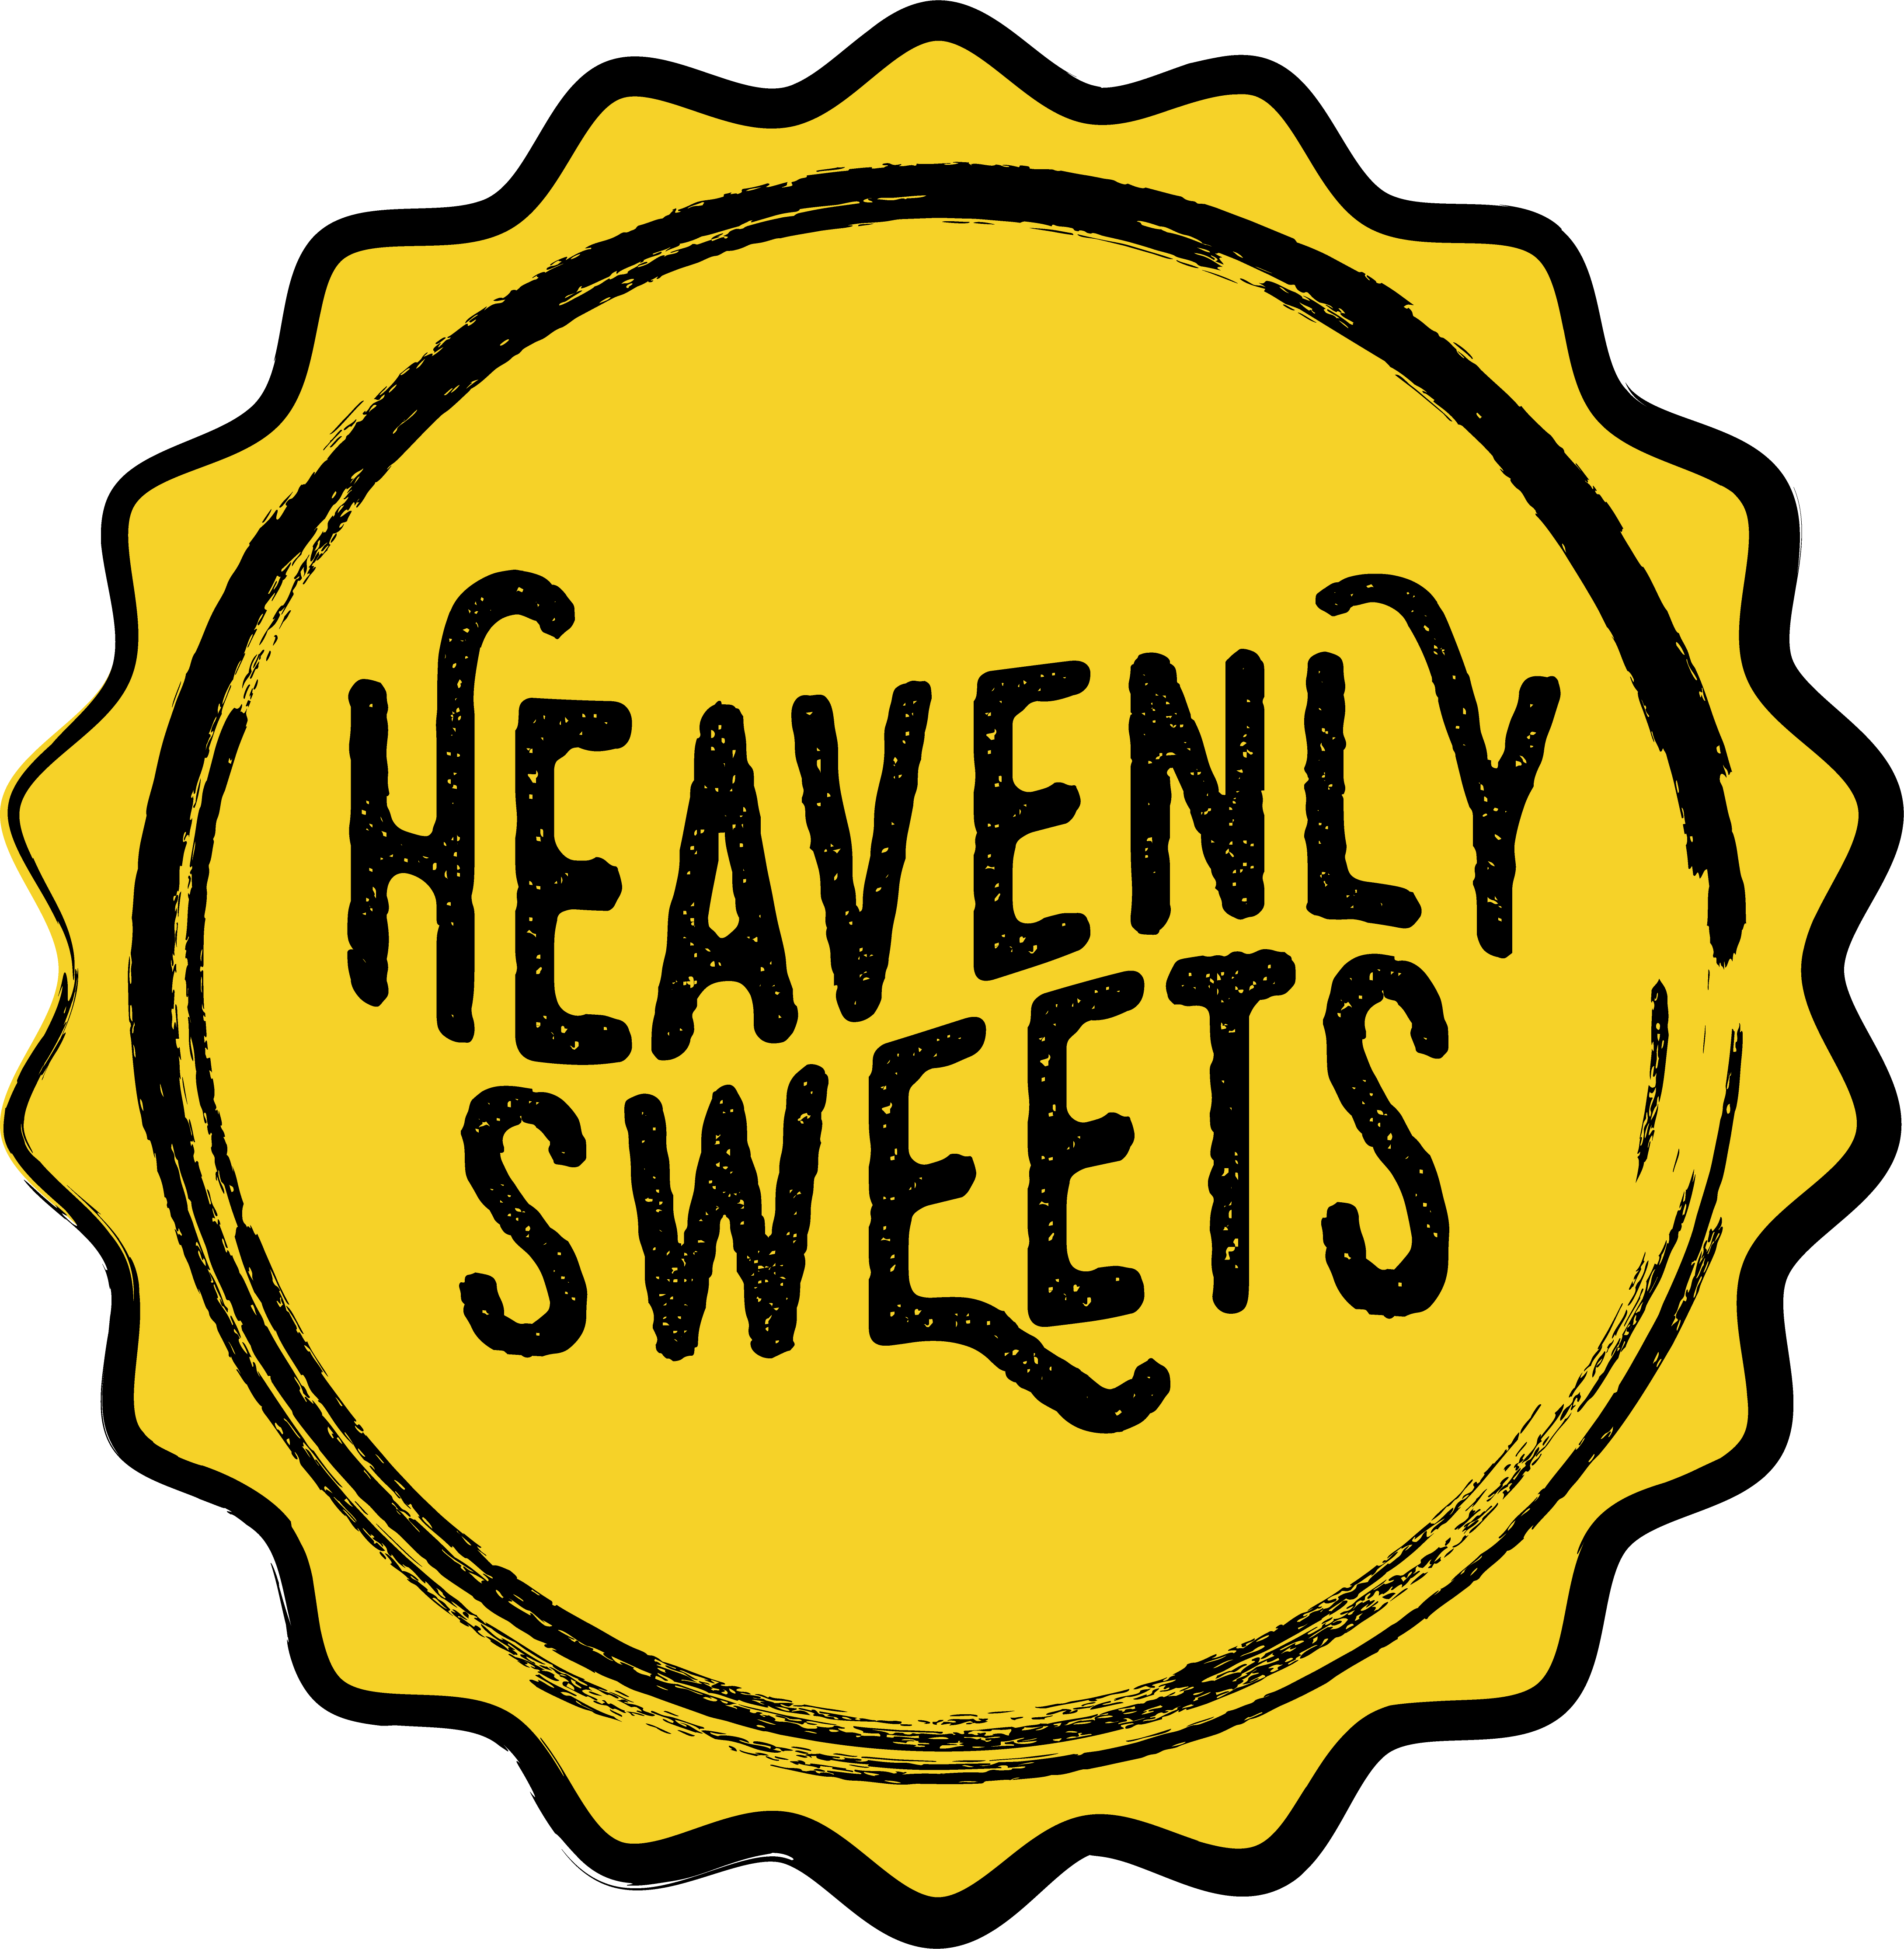 Products — Heavenly Sweet